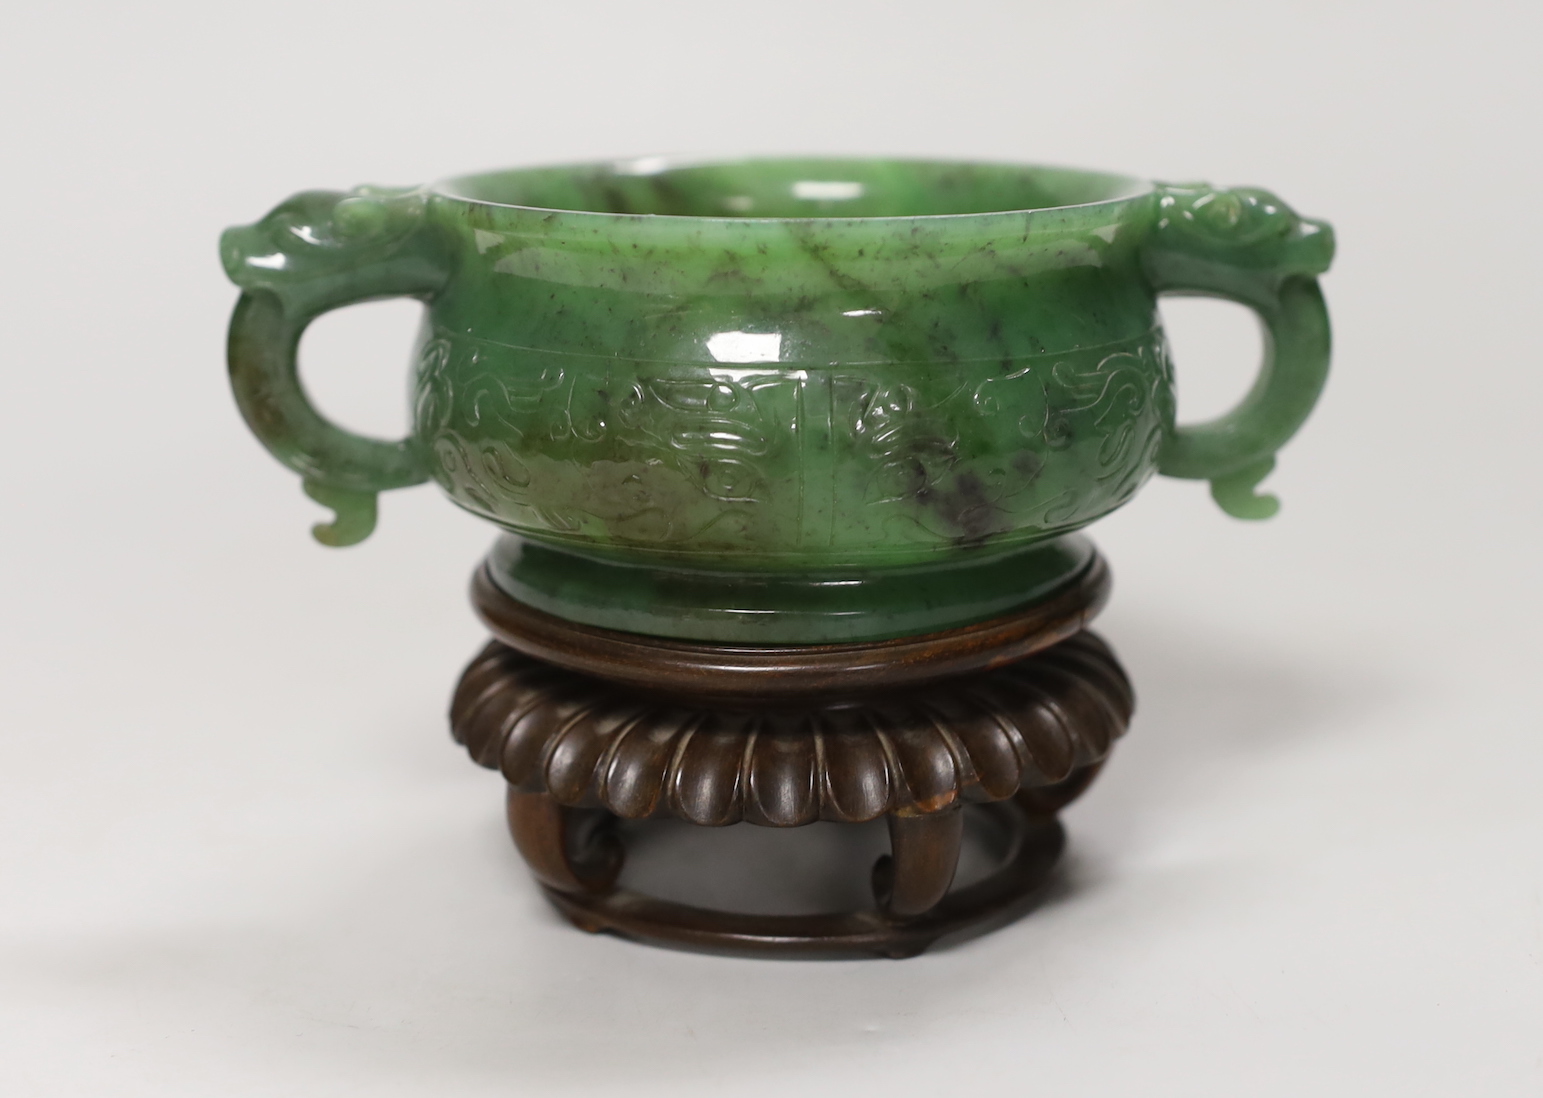 A Chinese archaistic green jade censer, wood stand. 10cm tall incl. stand